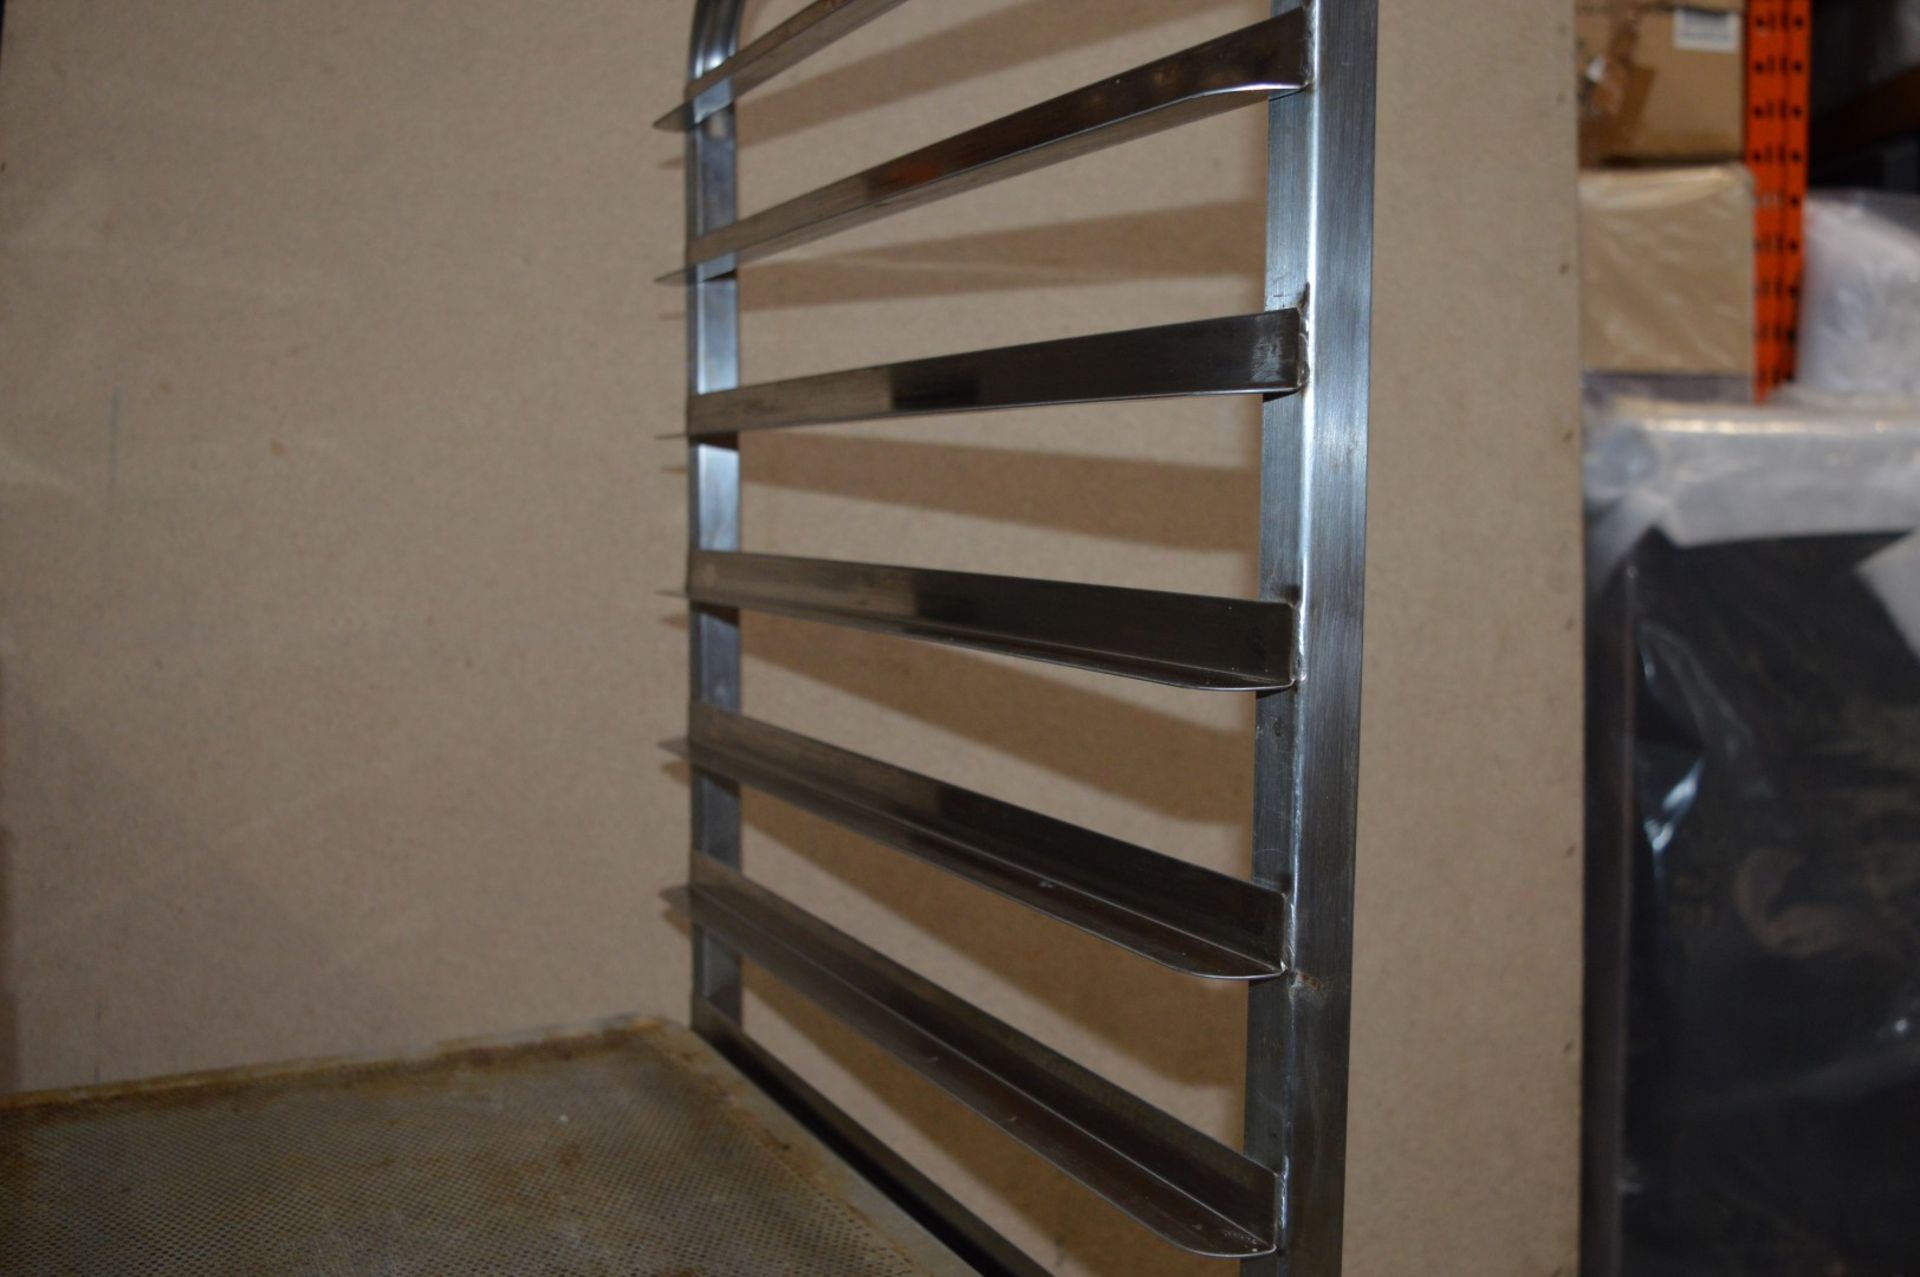 1 x Stainless Steel 18 Tier Pan and Tray Rack With Five Perforated Cooking Trays - CL282 - H183 x - Image 5 of 6